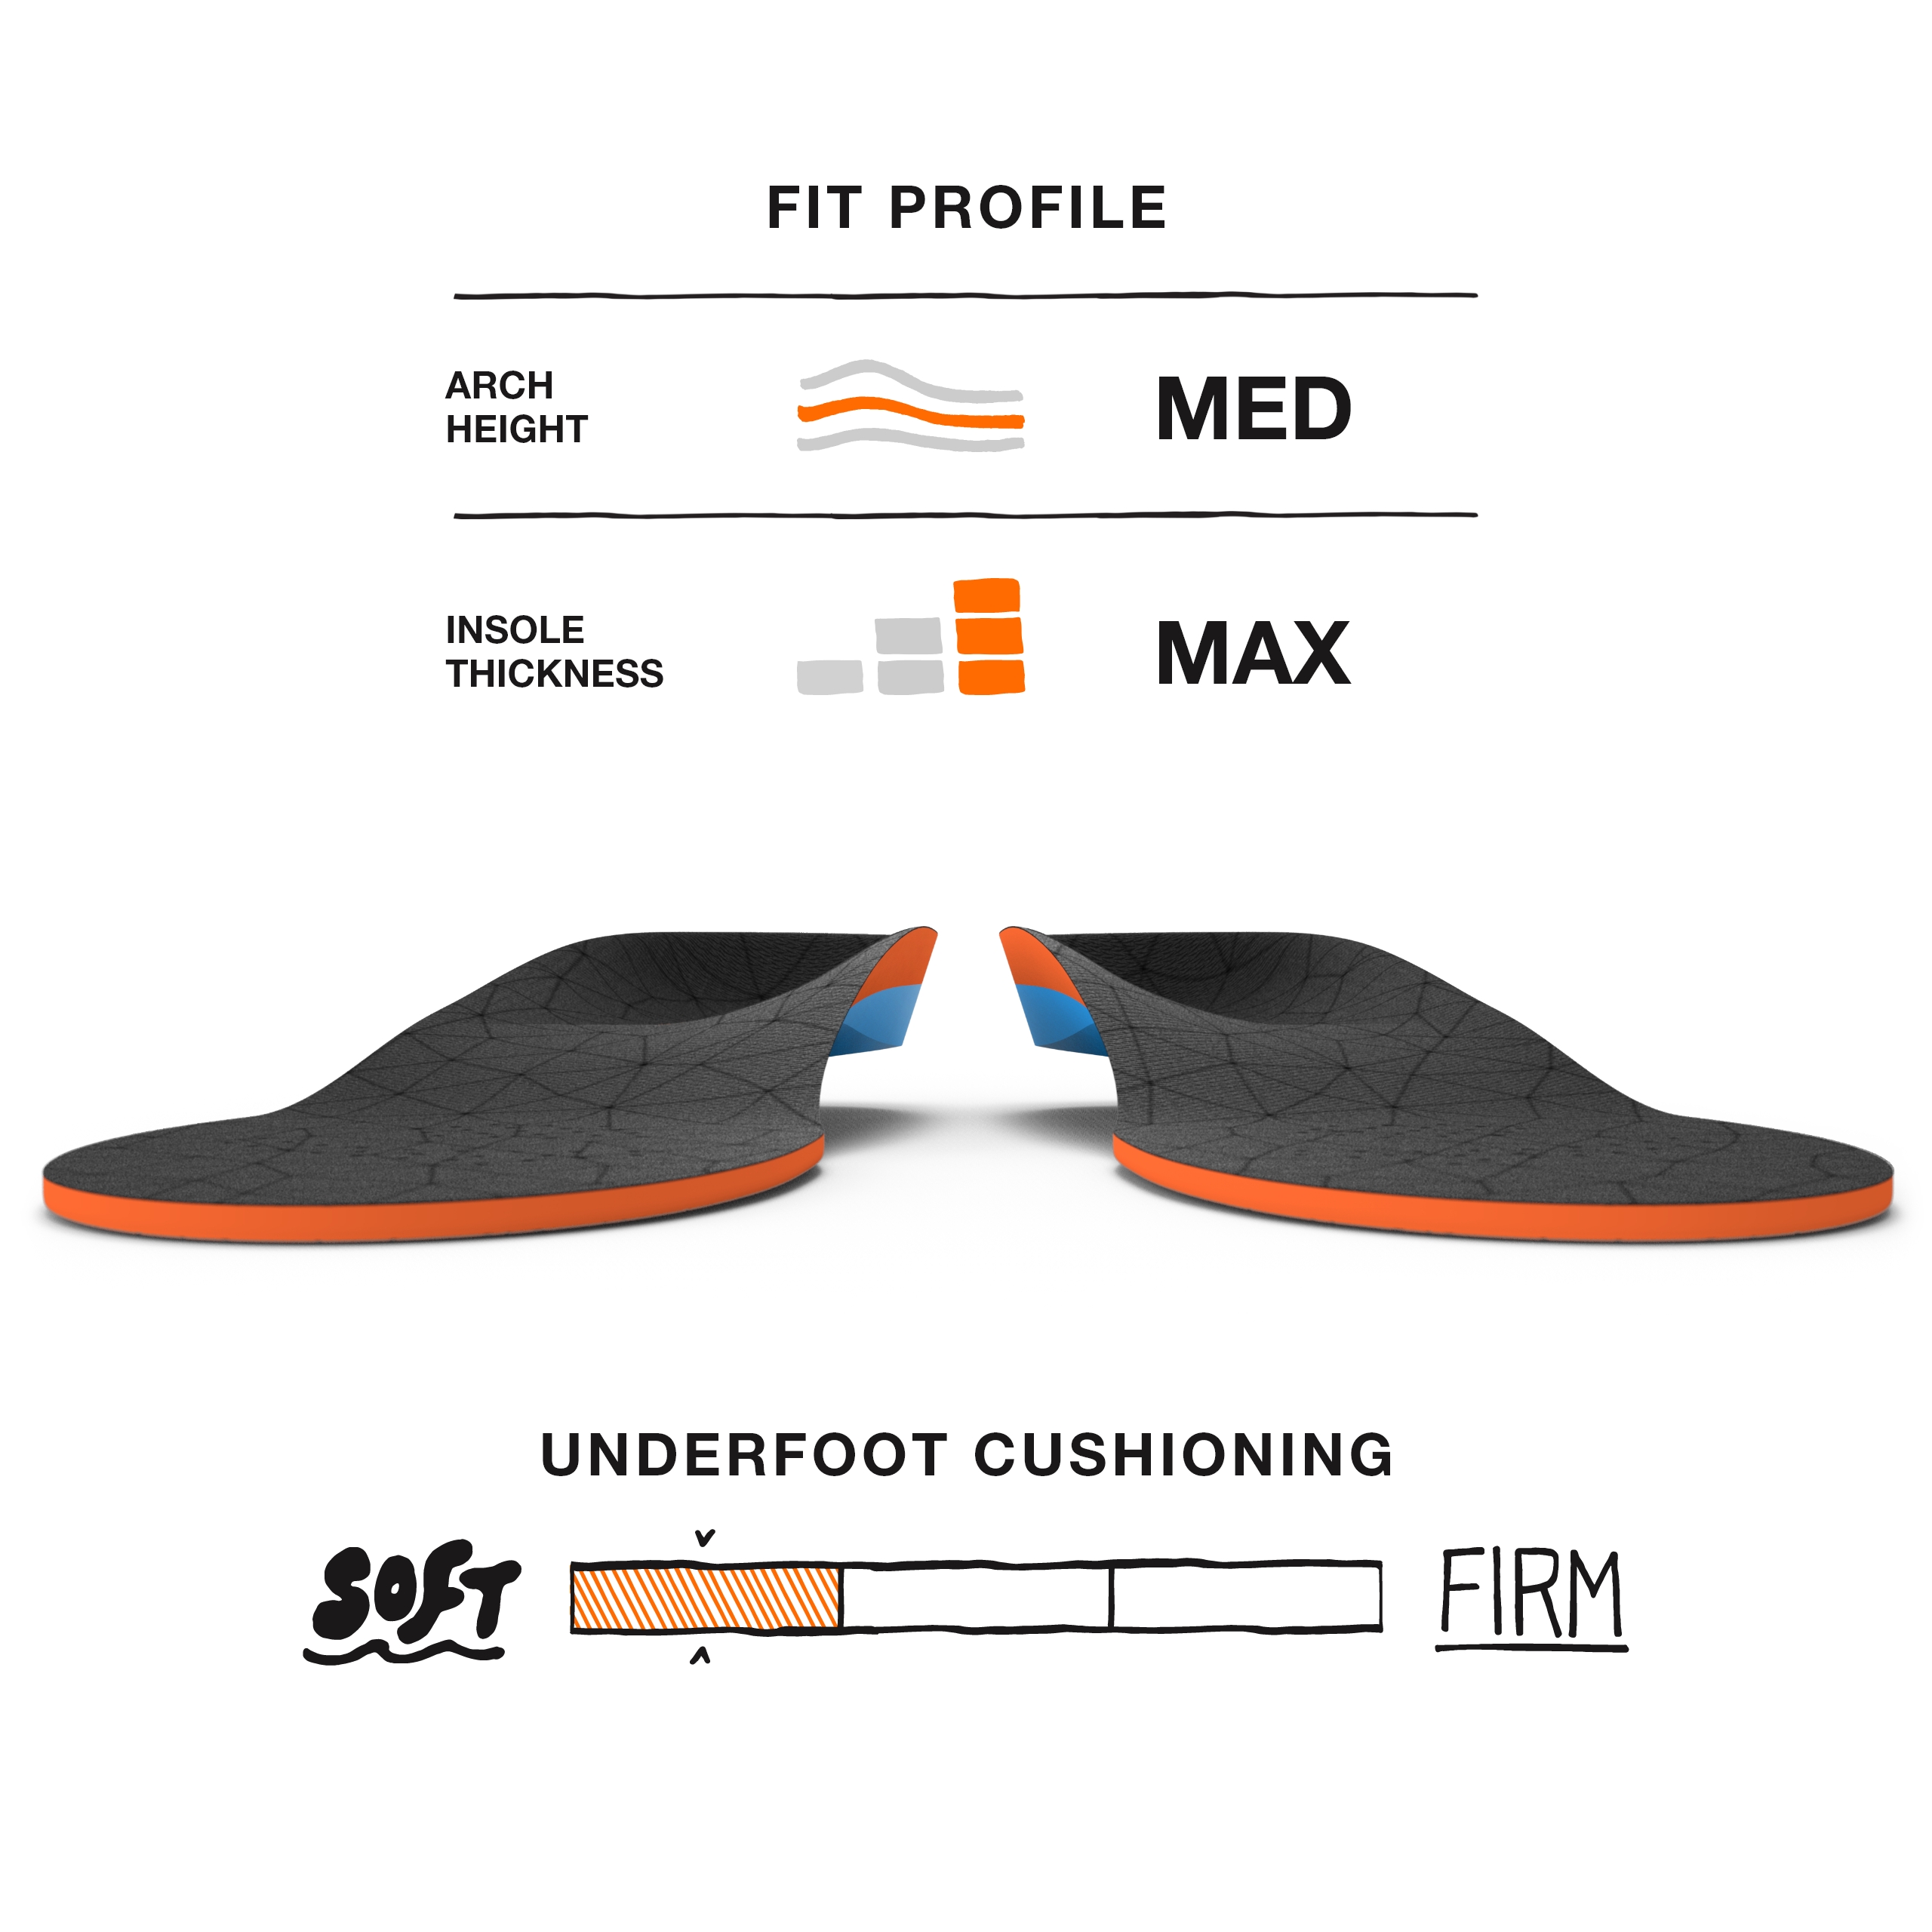 Superfeet All-Purpose Cushion Insoles - Trim-To-Fit Medium Arch Support Comfort Foam Inserts for Workout Shoes - Professional Grade - Men 5.5-7 / Women 6.5-8 - image 3 of 6